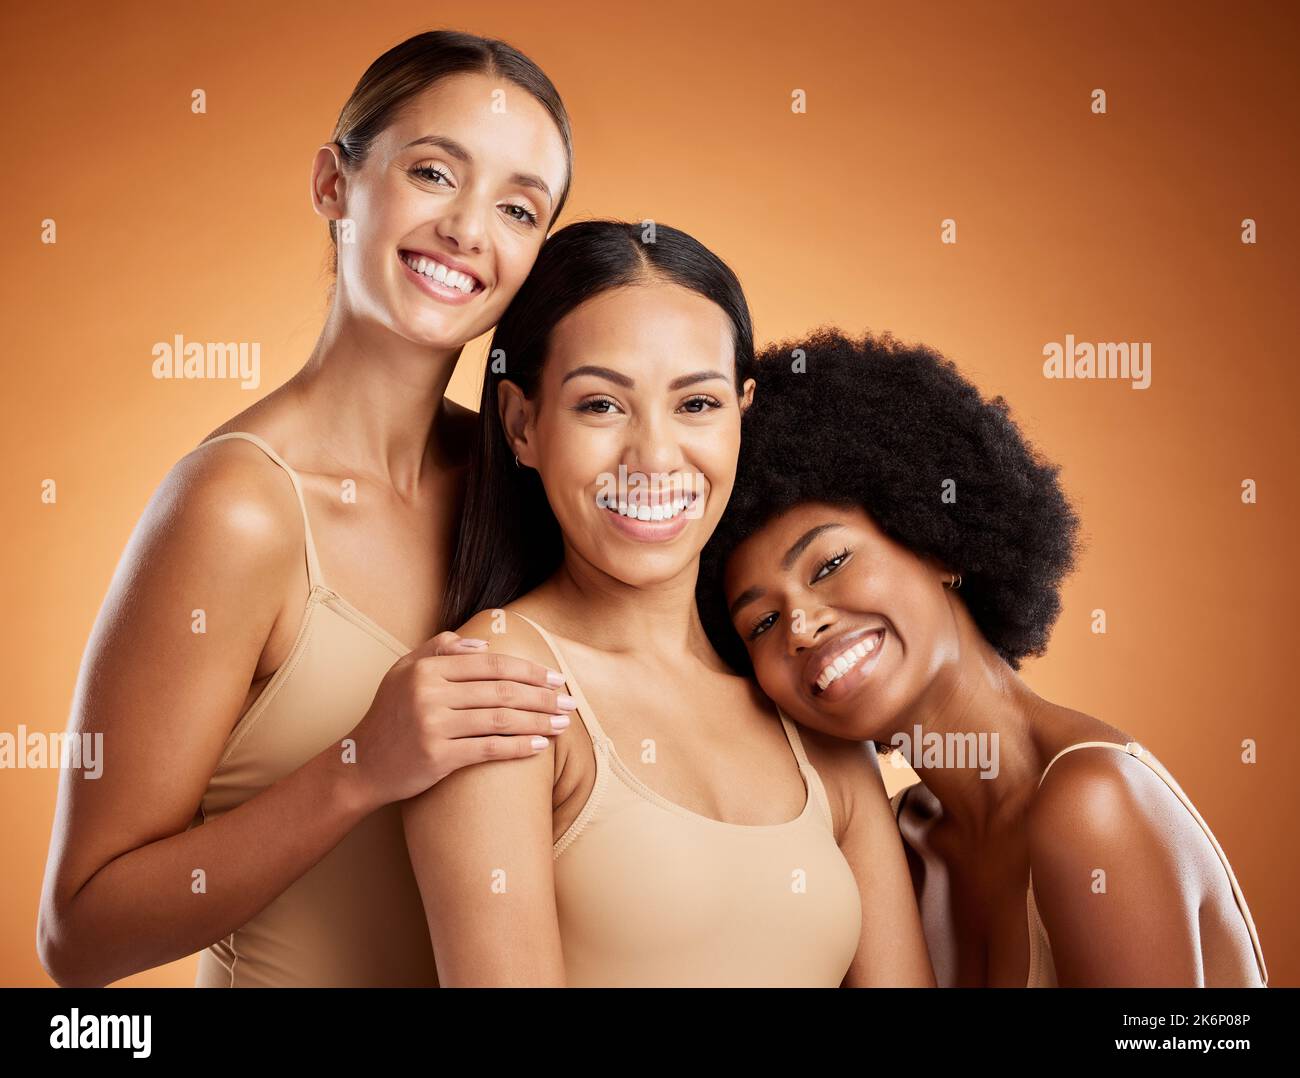 Beauty, diversity skincare portrait of women with smile, makeup and cosmetics for natural skin and hair. Group of self love female models posing for Stock Photo